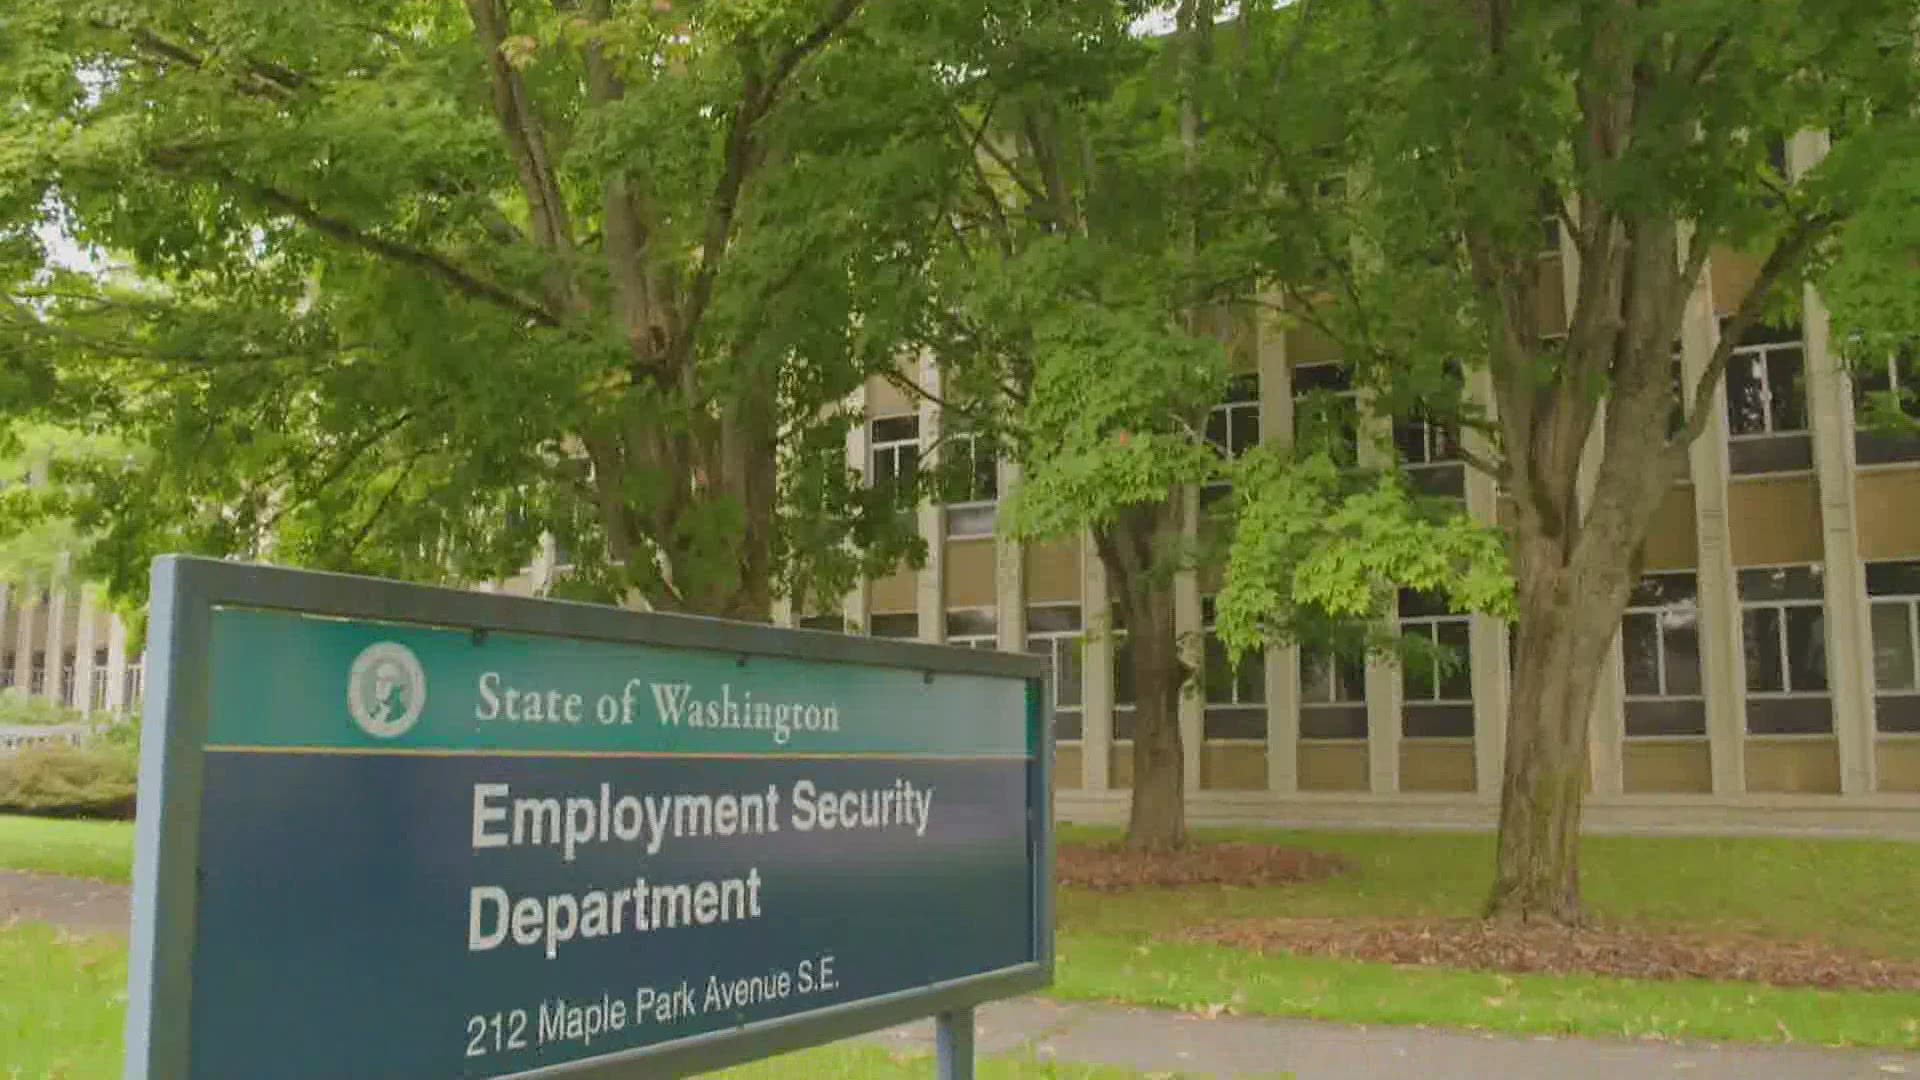 A man accused of filing 102 jobless claims in Washington has been arrested. His involvement is part of the $646 million the state lost to unemployment fraud in 2020.